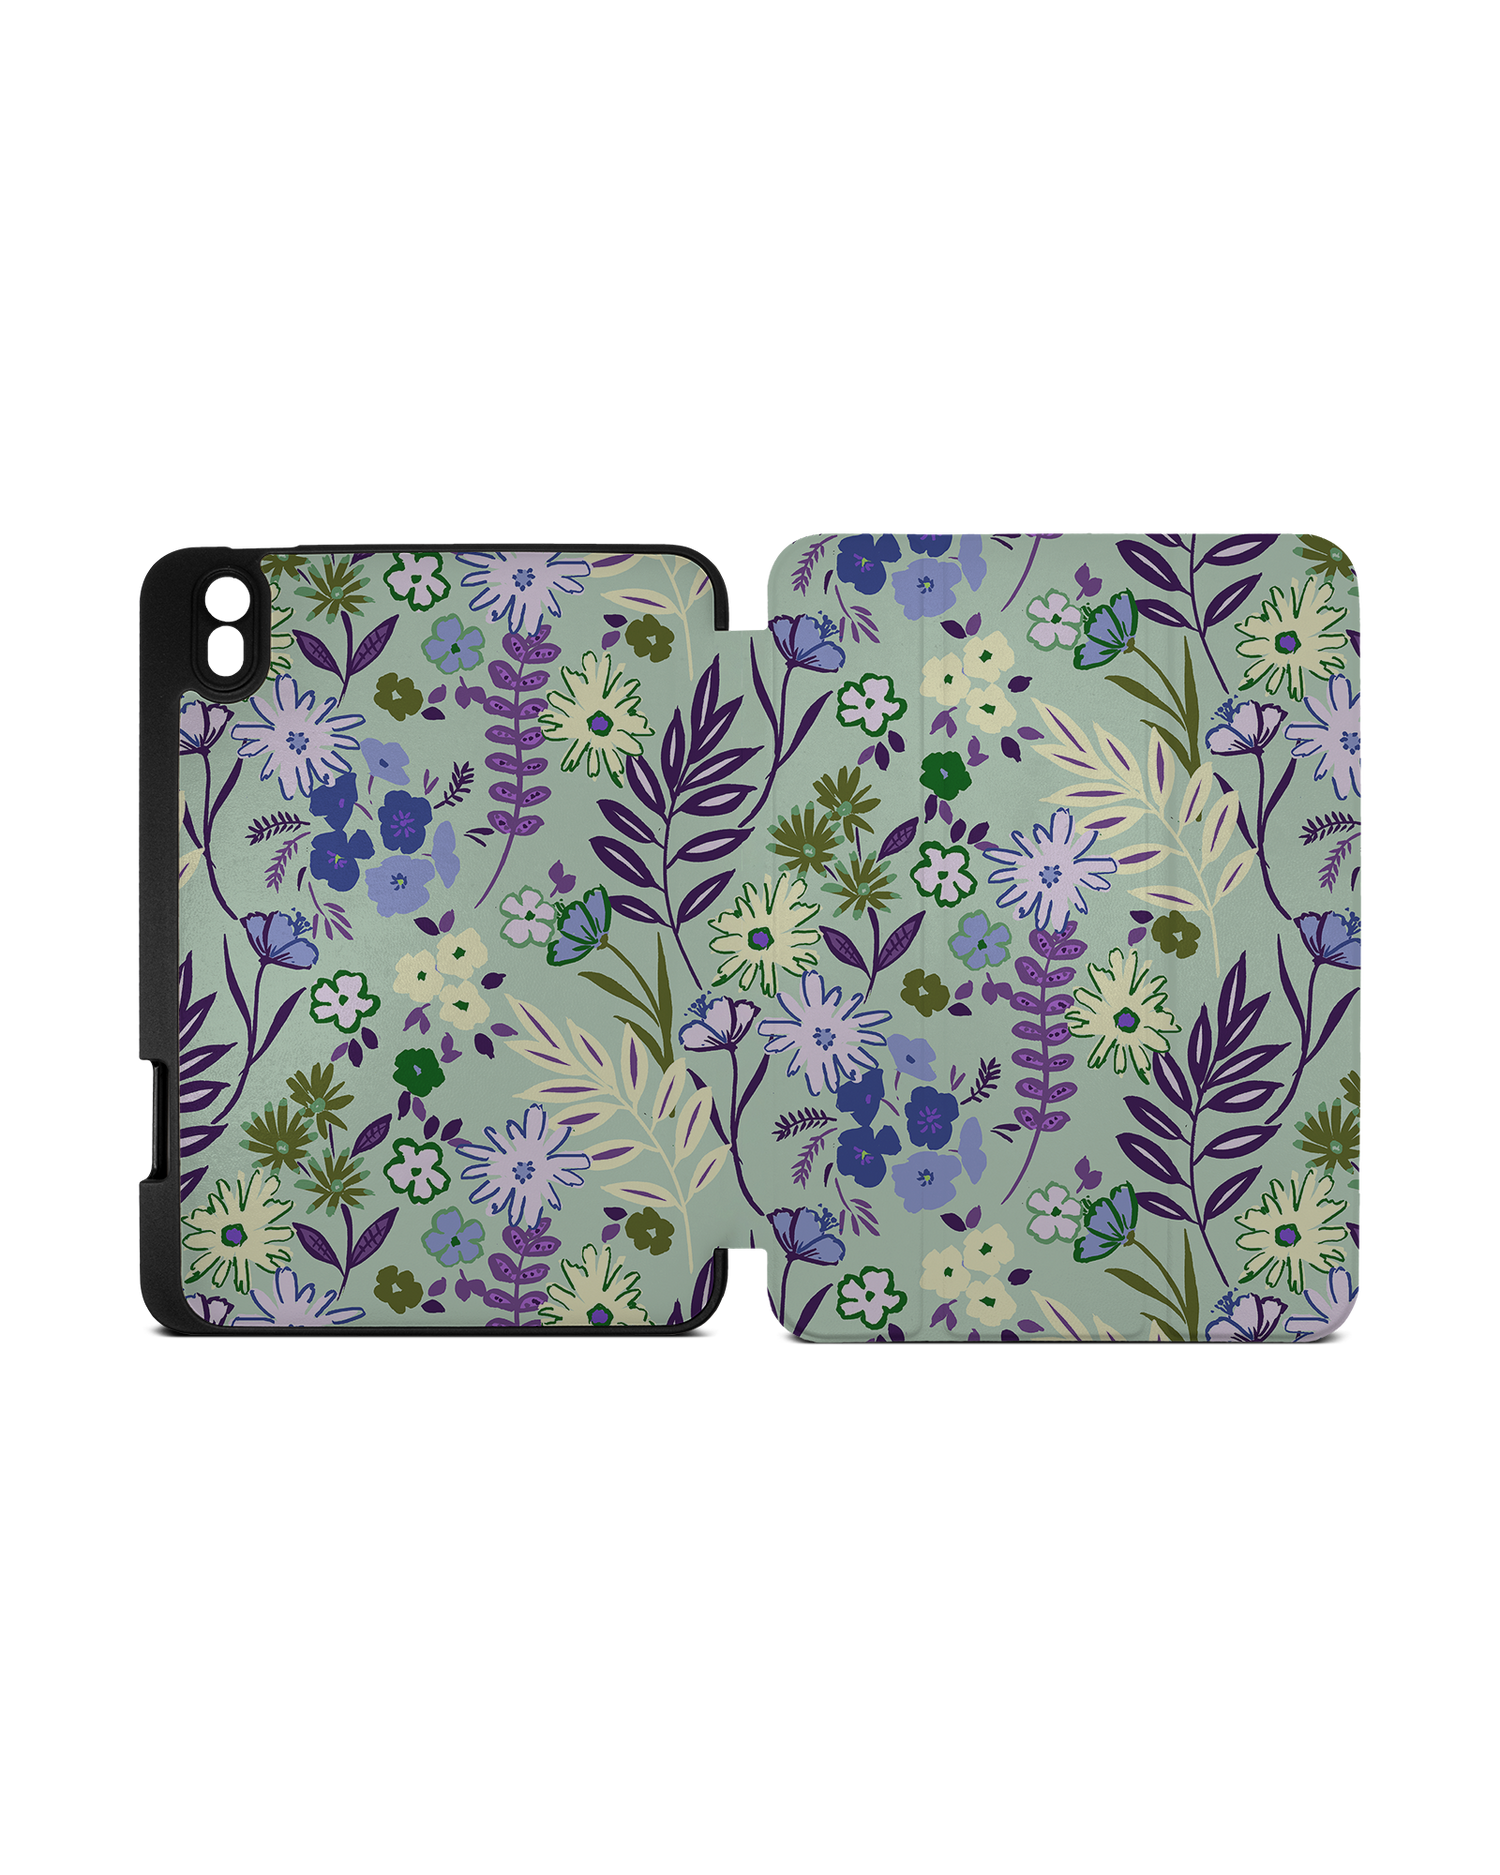 Pretty Purple Flowers iPad Case with Pencil Holder Apple iPad mini 6 (2021): Opened exterior view